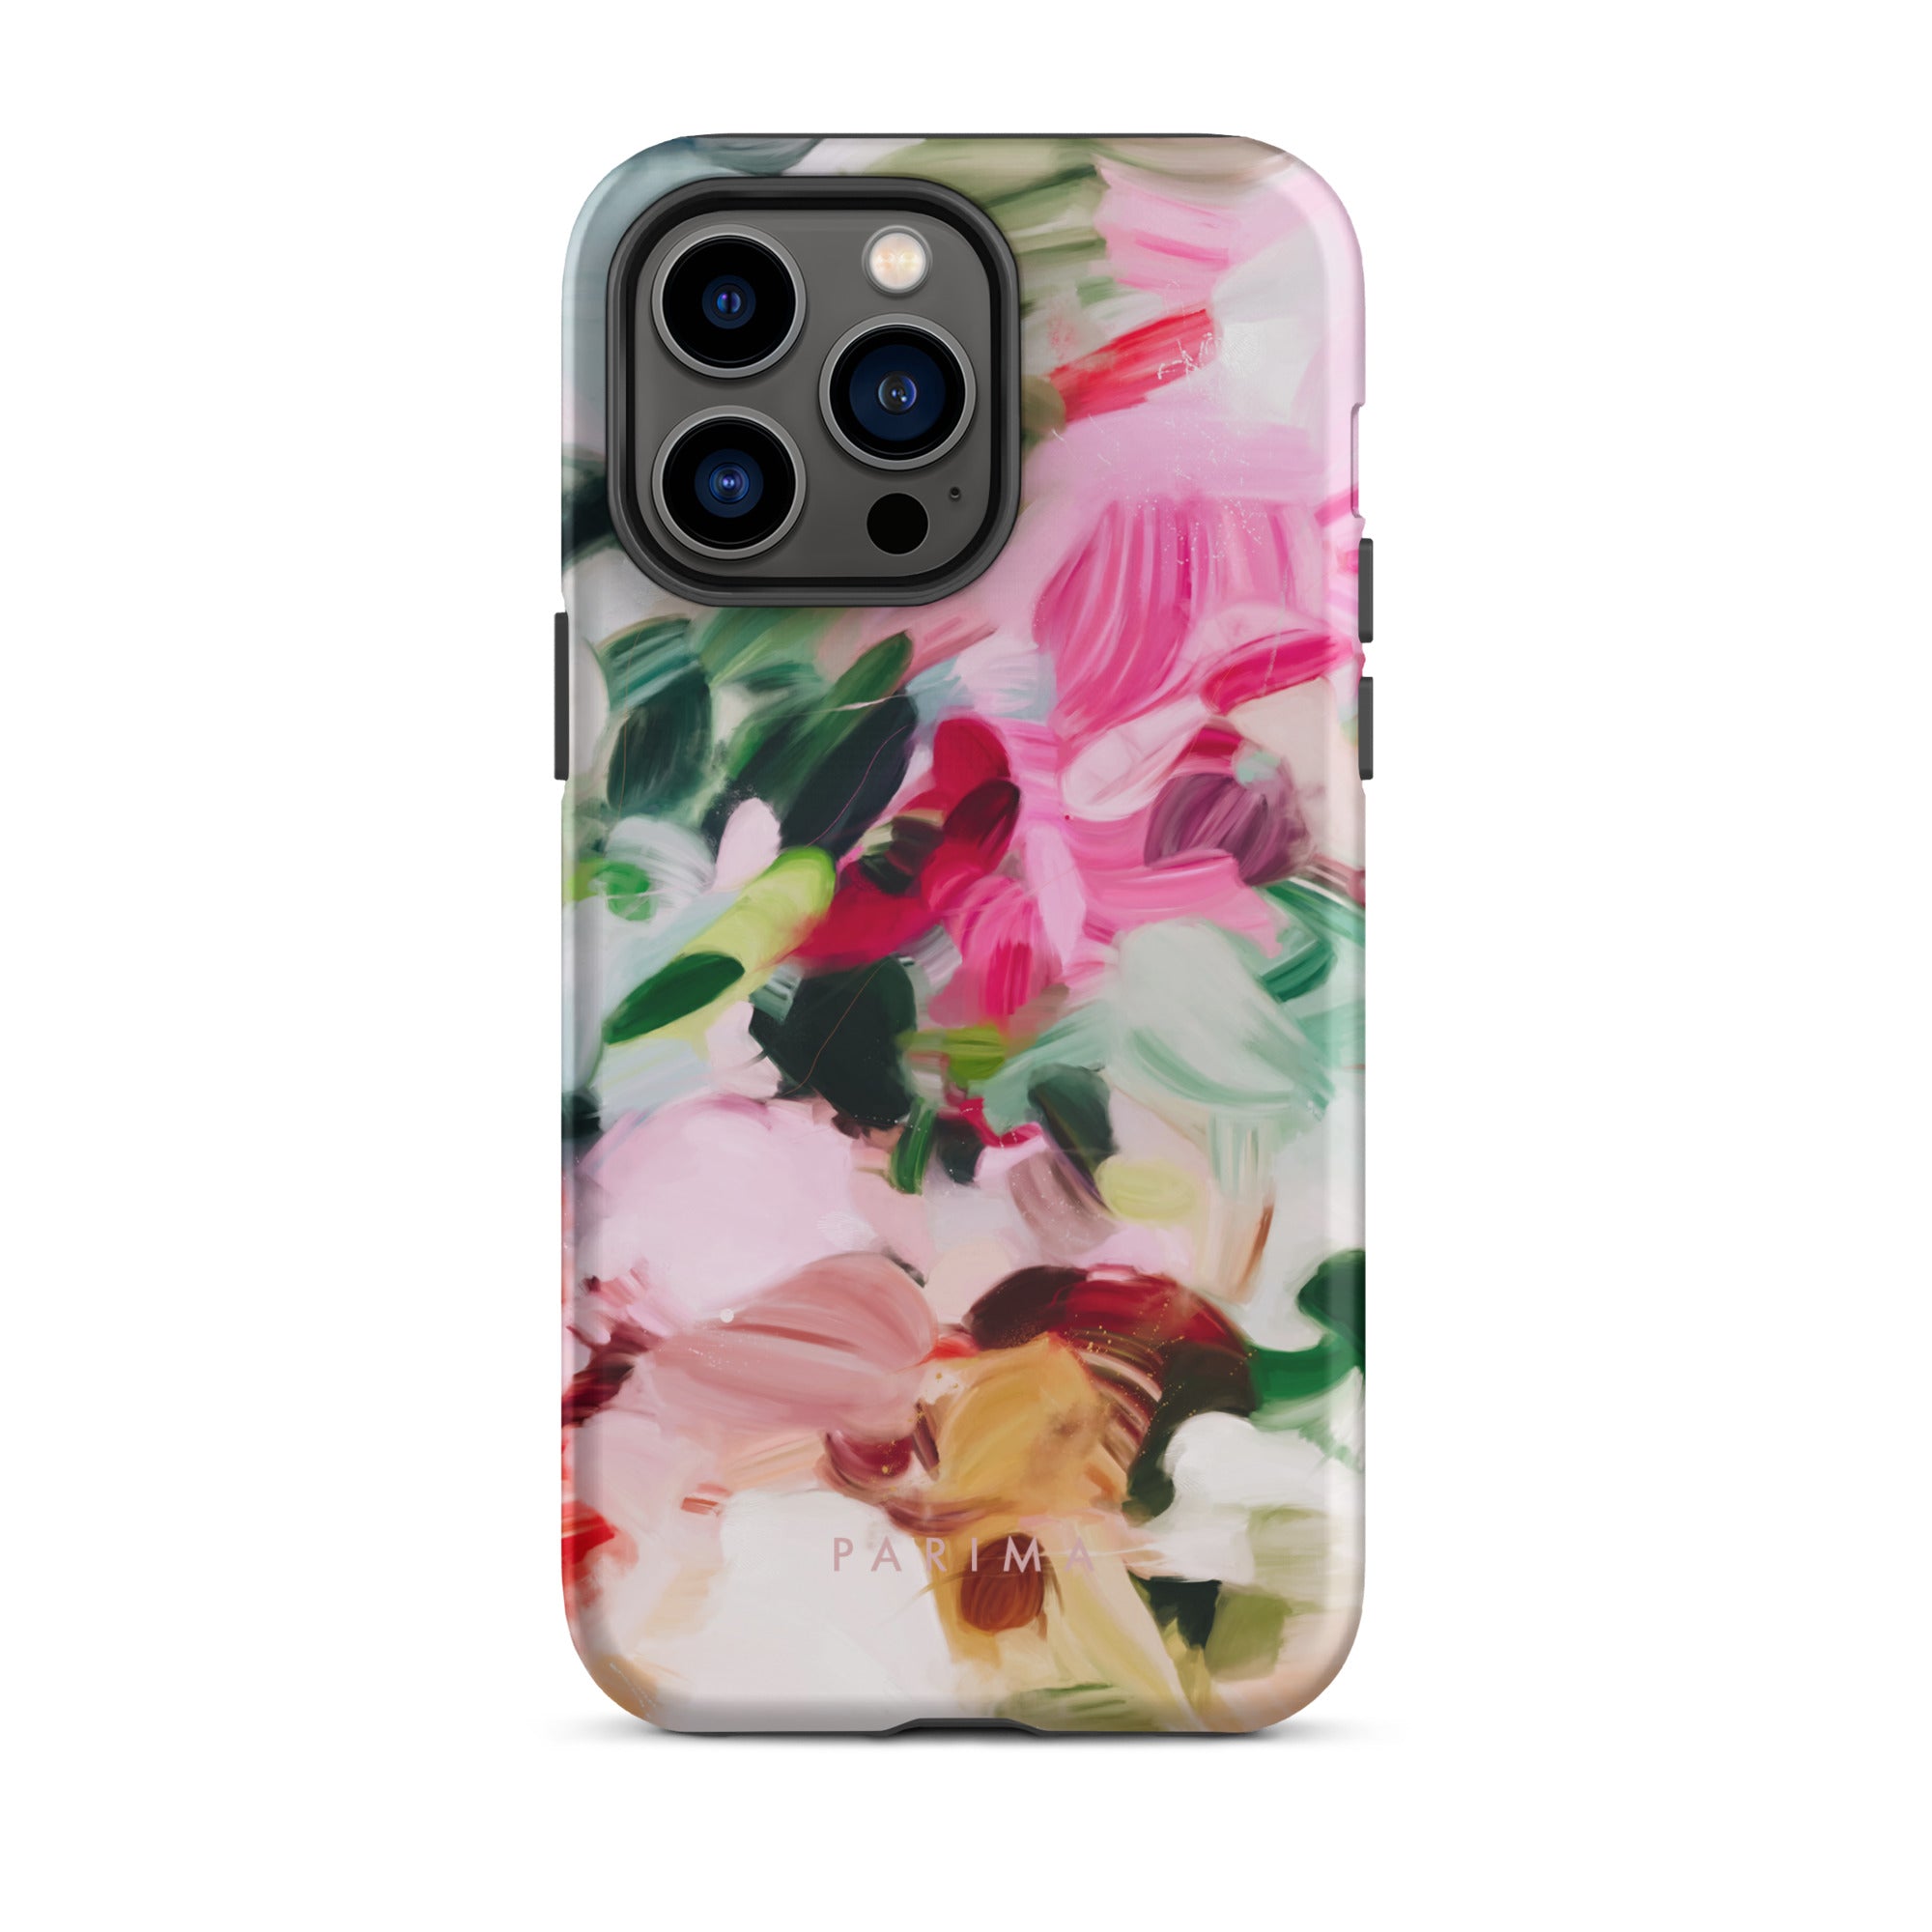 Bloom, pink and green abstract art - iPhone 14 Pro Max tough case by Parima Studio